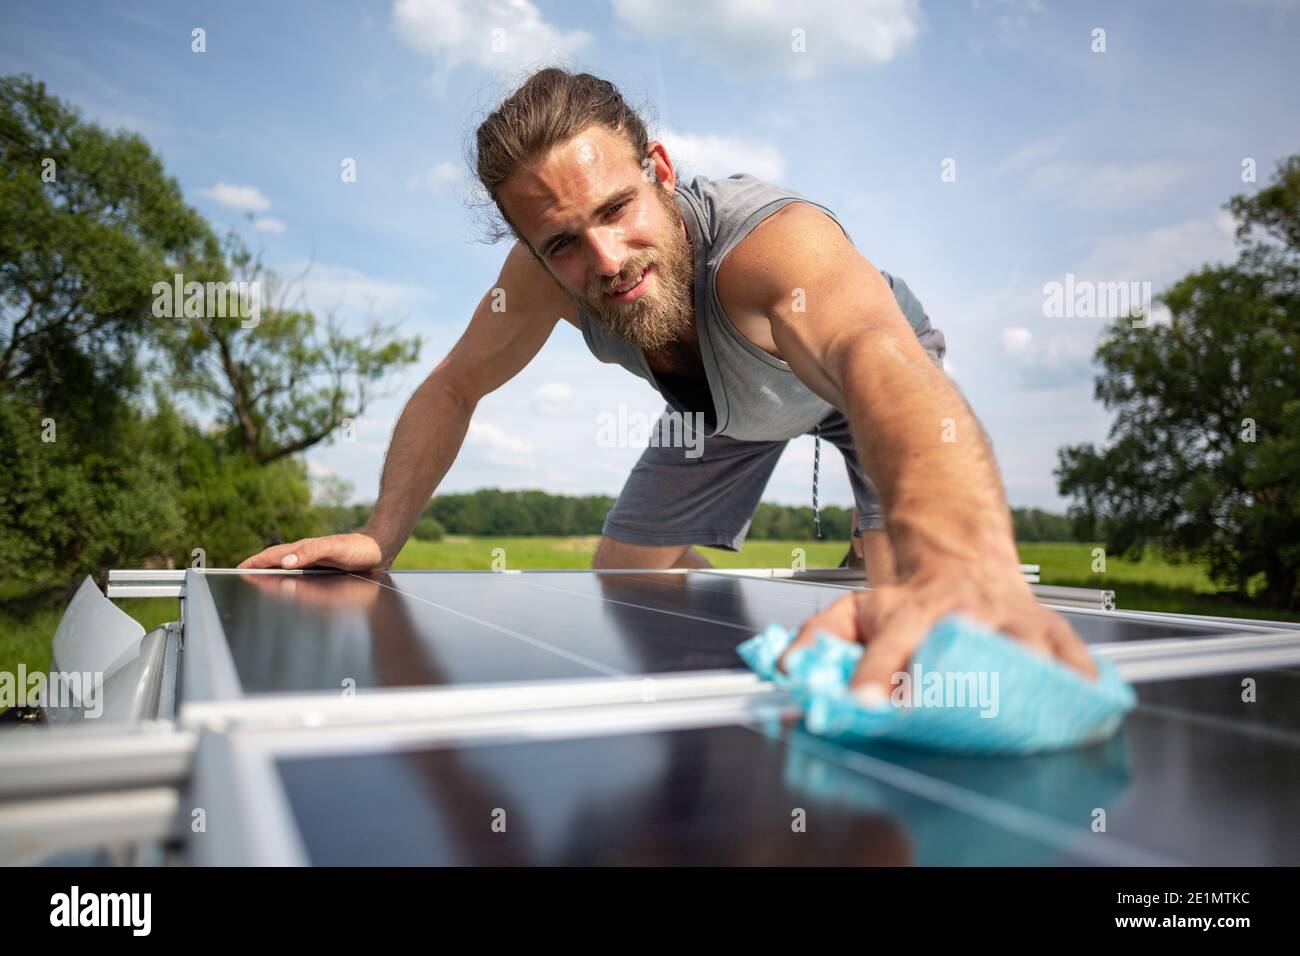 Man wiping a solar panel on the roof of a caravan Stock Photo